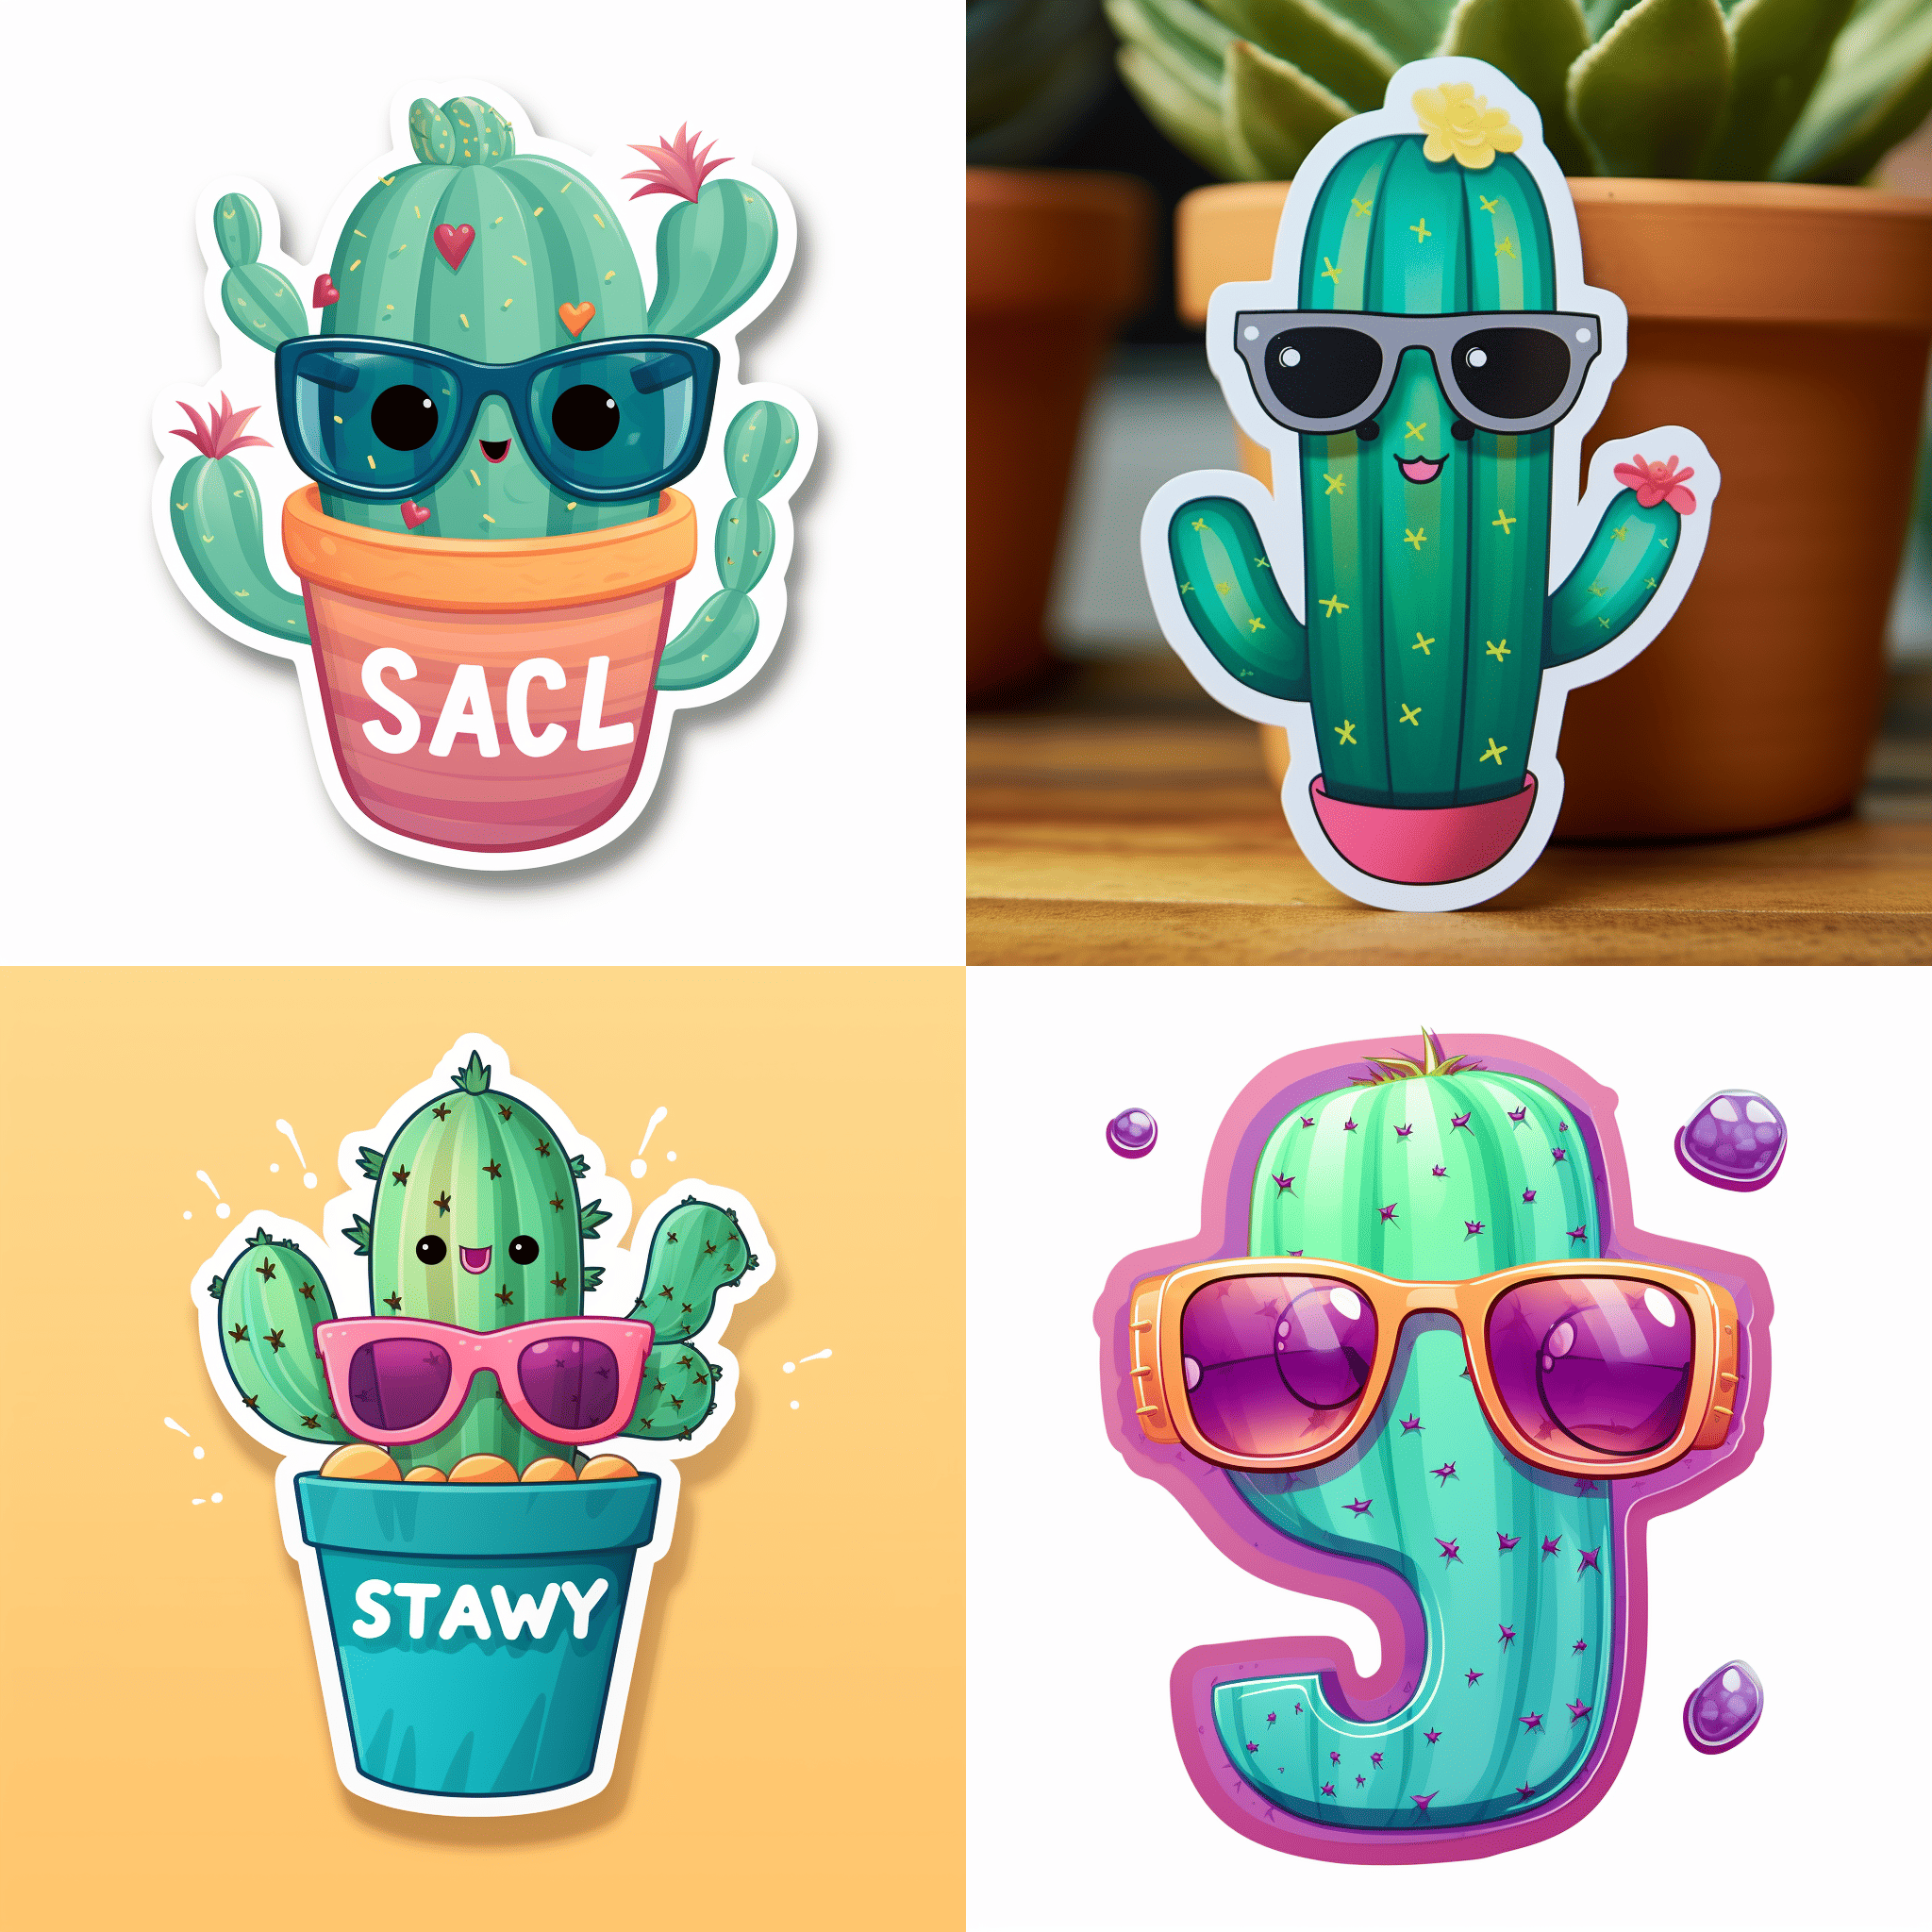 A vibrant sticker of a kawaii-style cactus wearing sunglasses, with the words 'Stay Cool' in bubbly letters